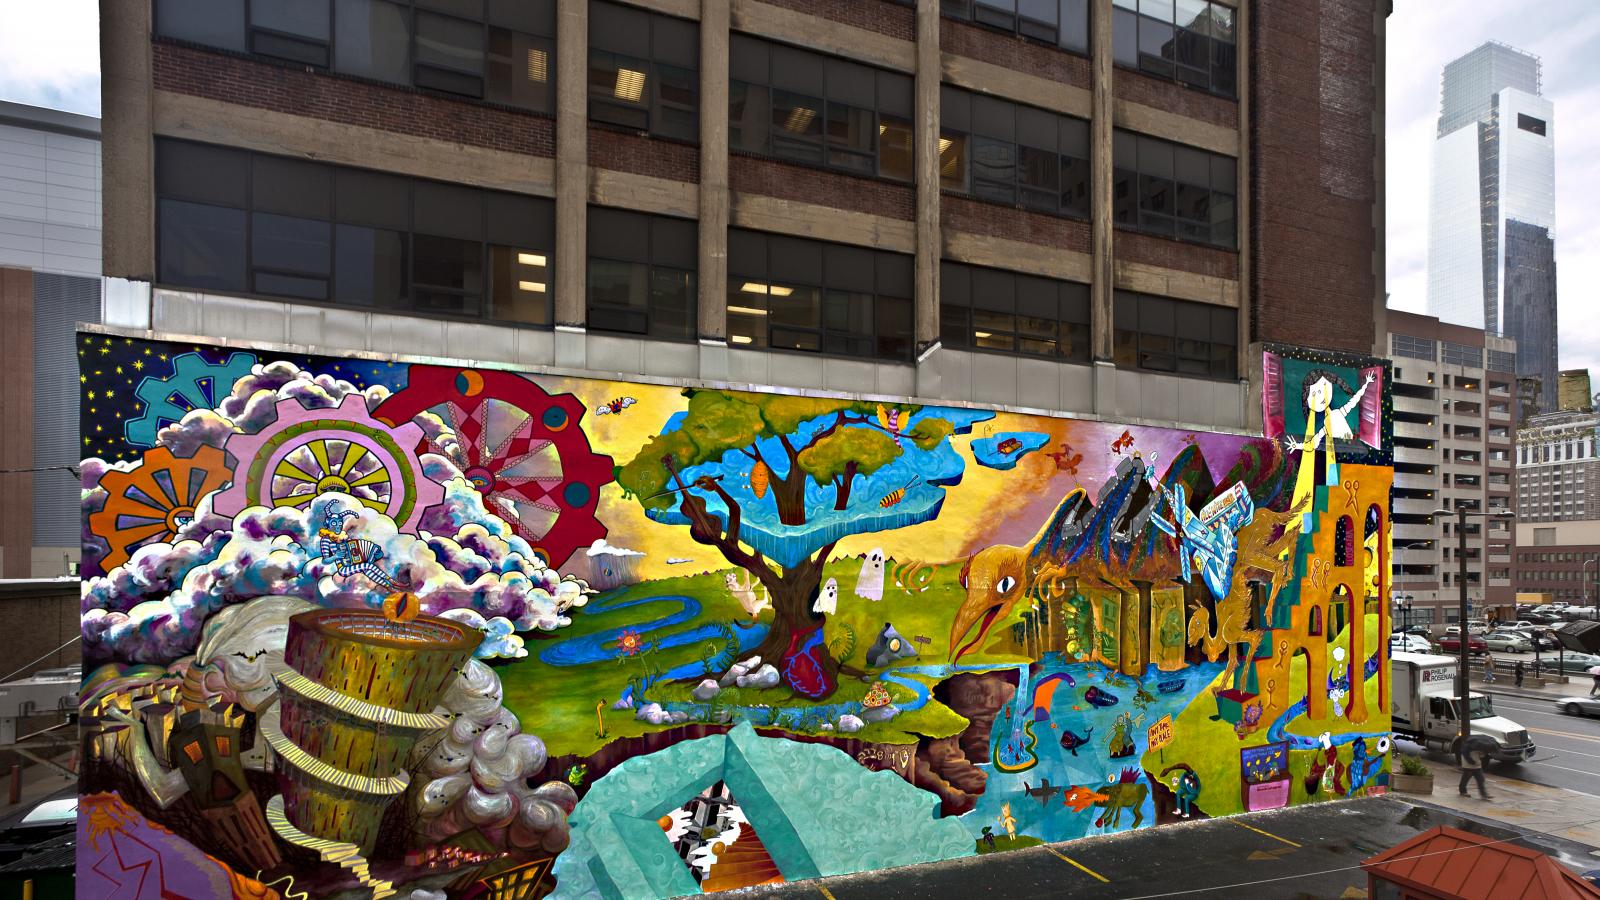 A brightly colored mural on a Philadelphia city wall